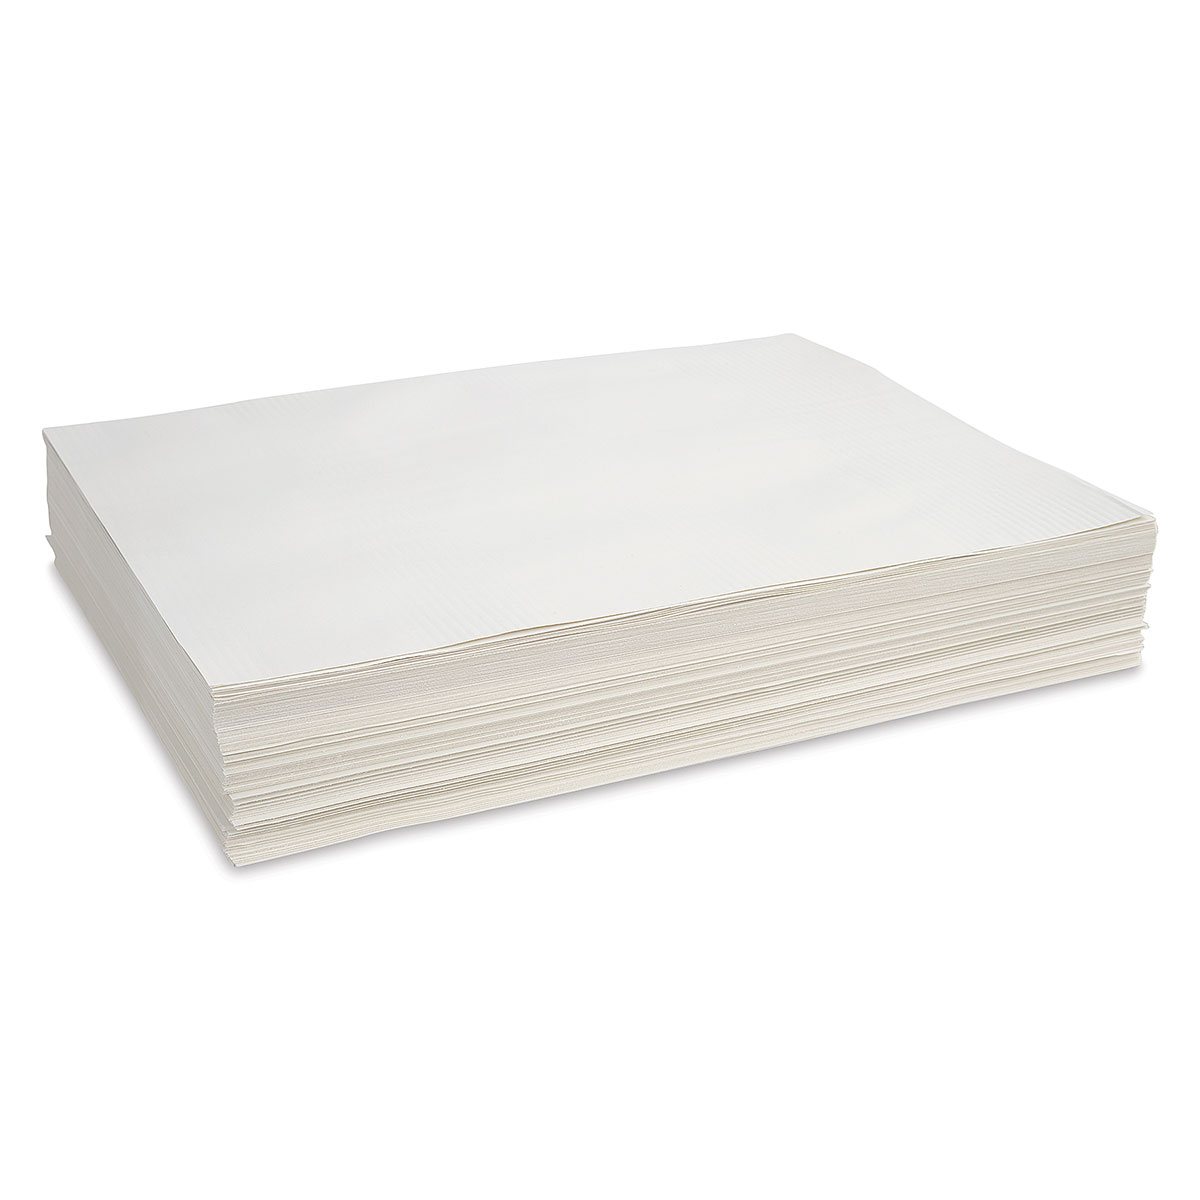 Sax Sulphite Drawing Paper, 80 lb, 12x18 Inches, Extra-White, Pack